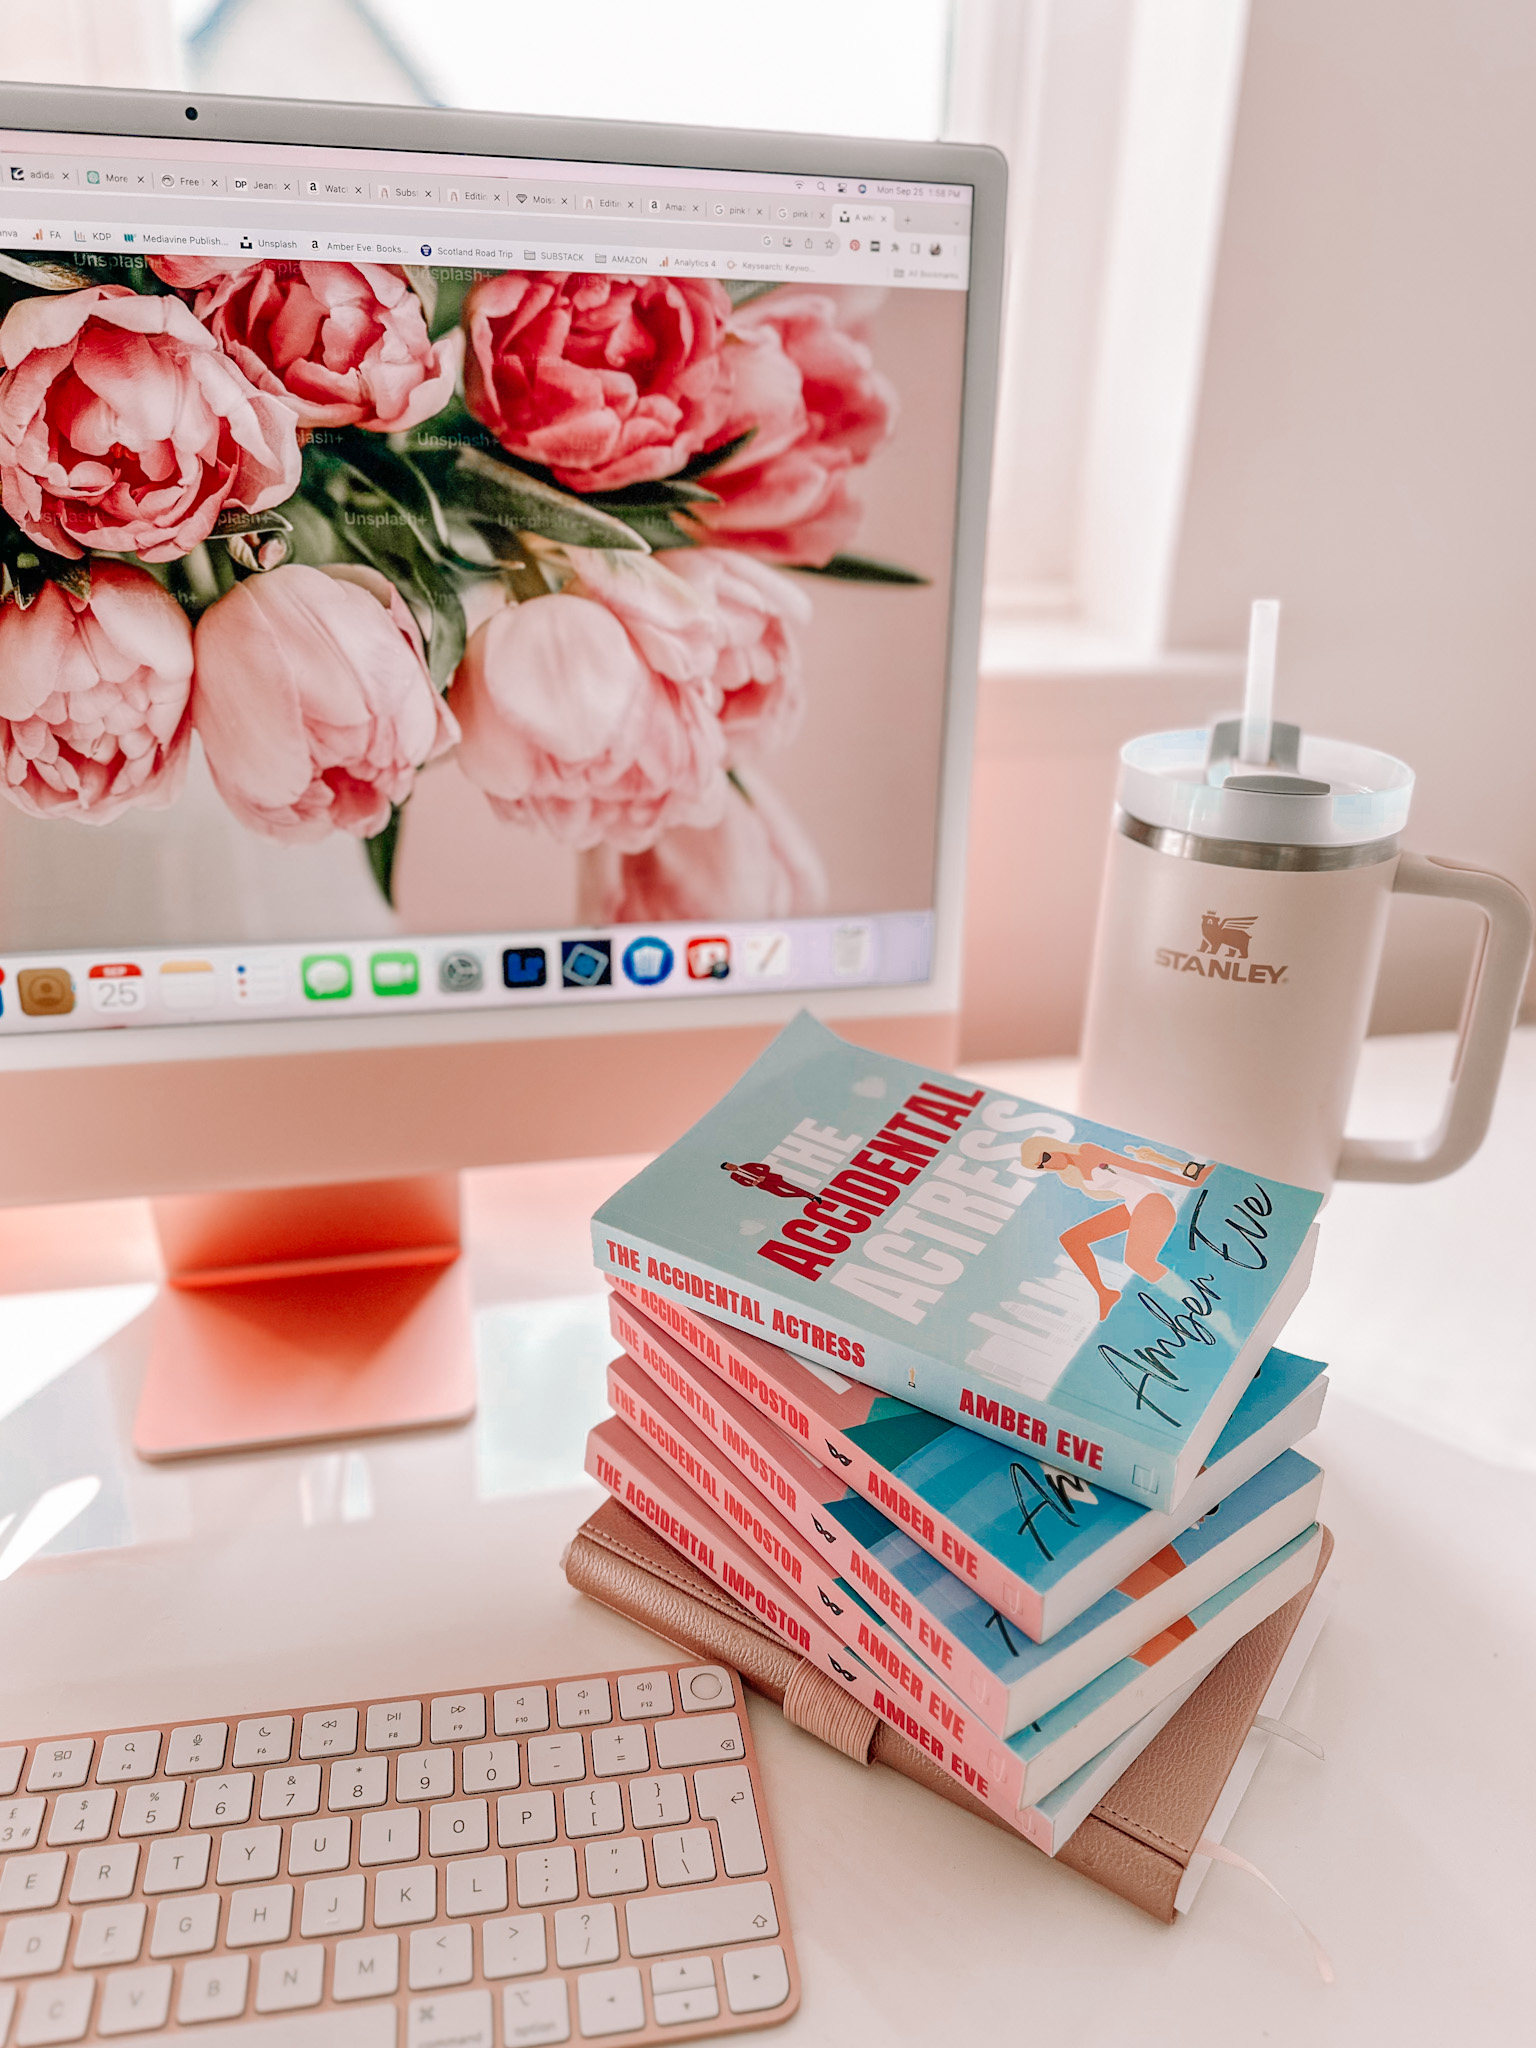 romcom books by Amber Eve next to pink iMac computer with floral desktop display